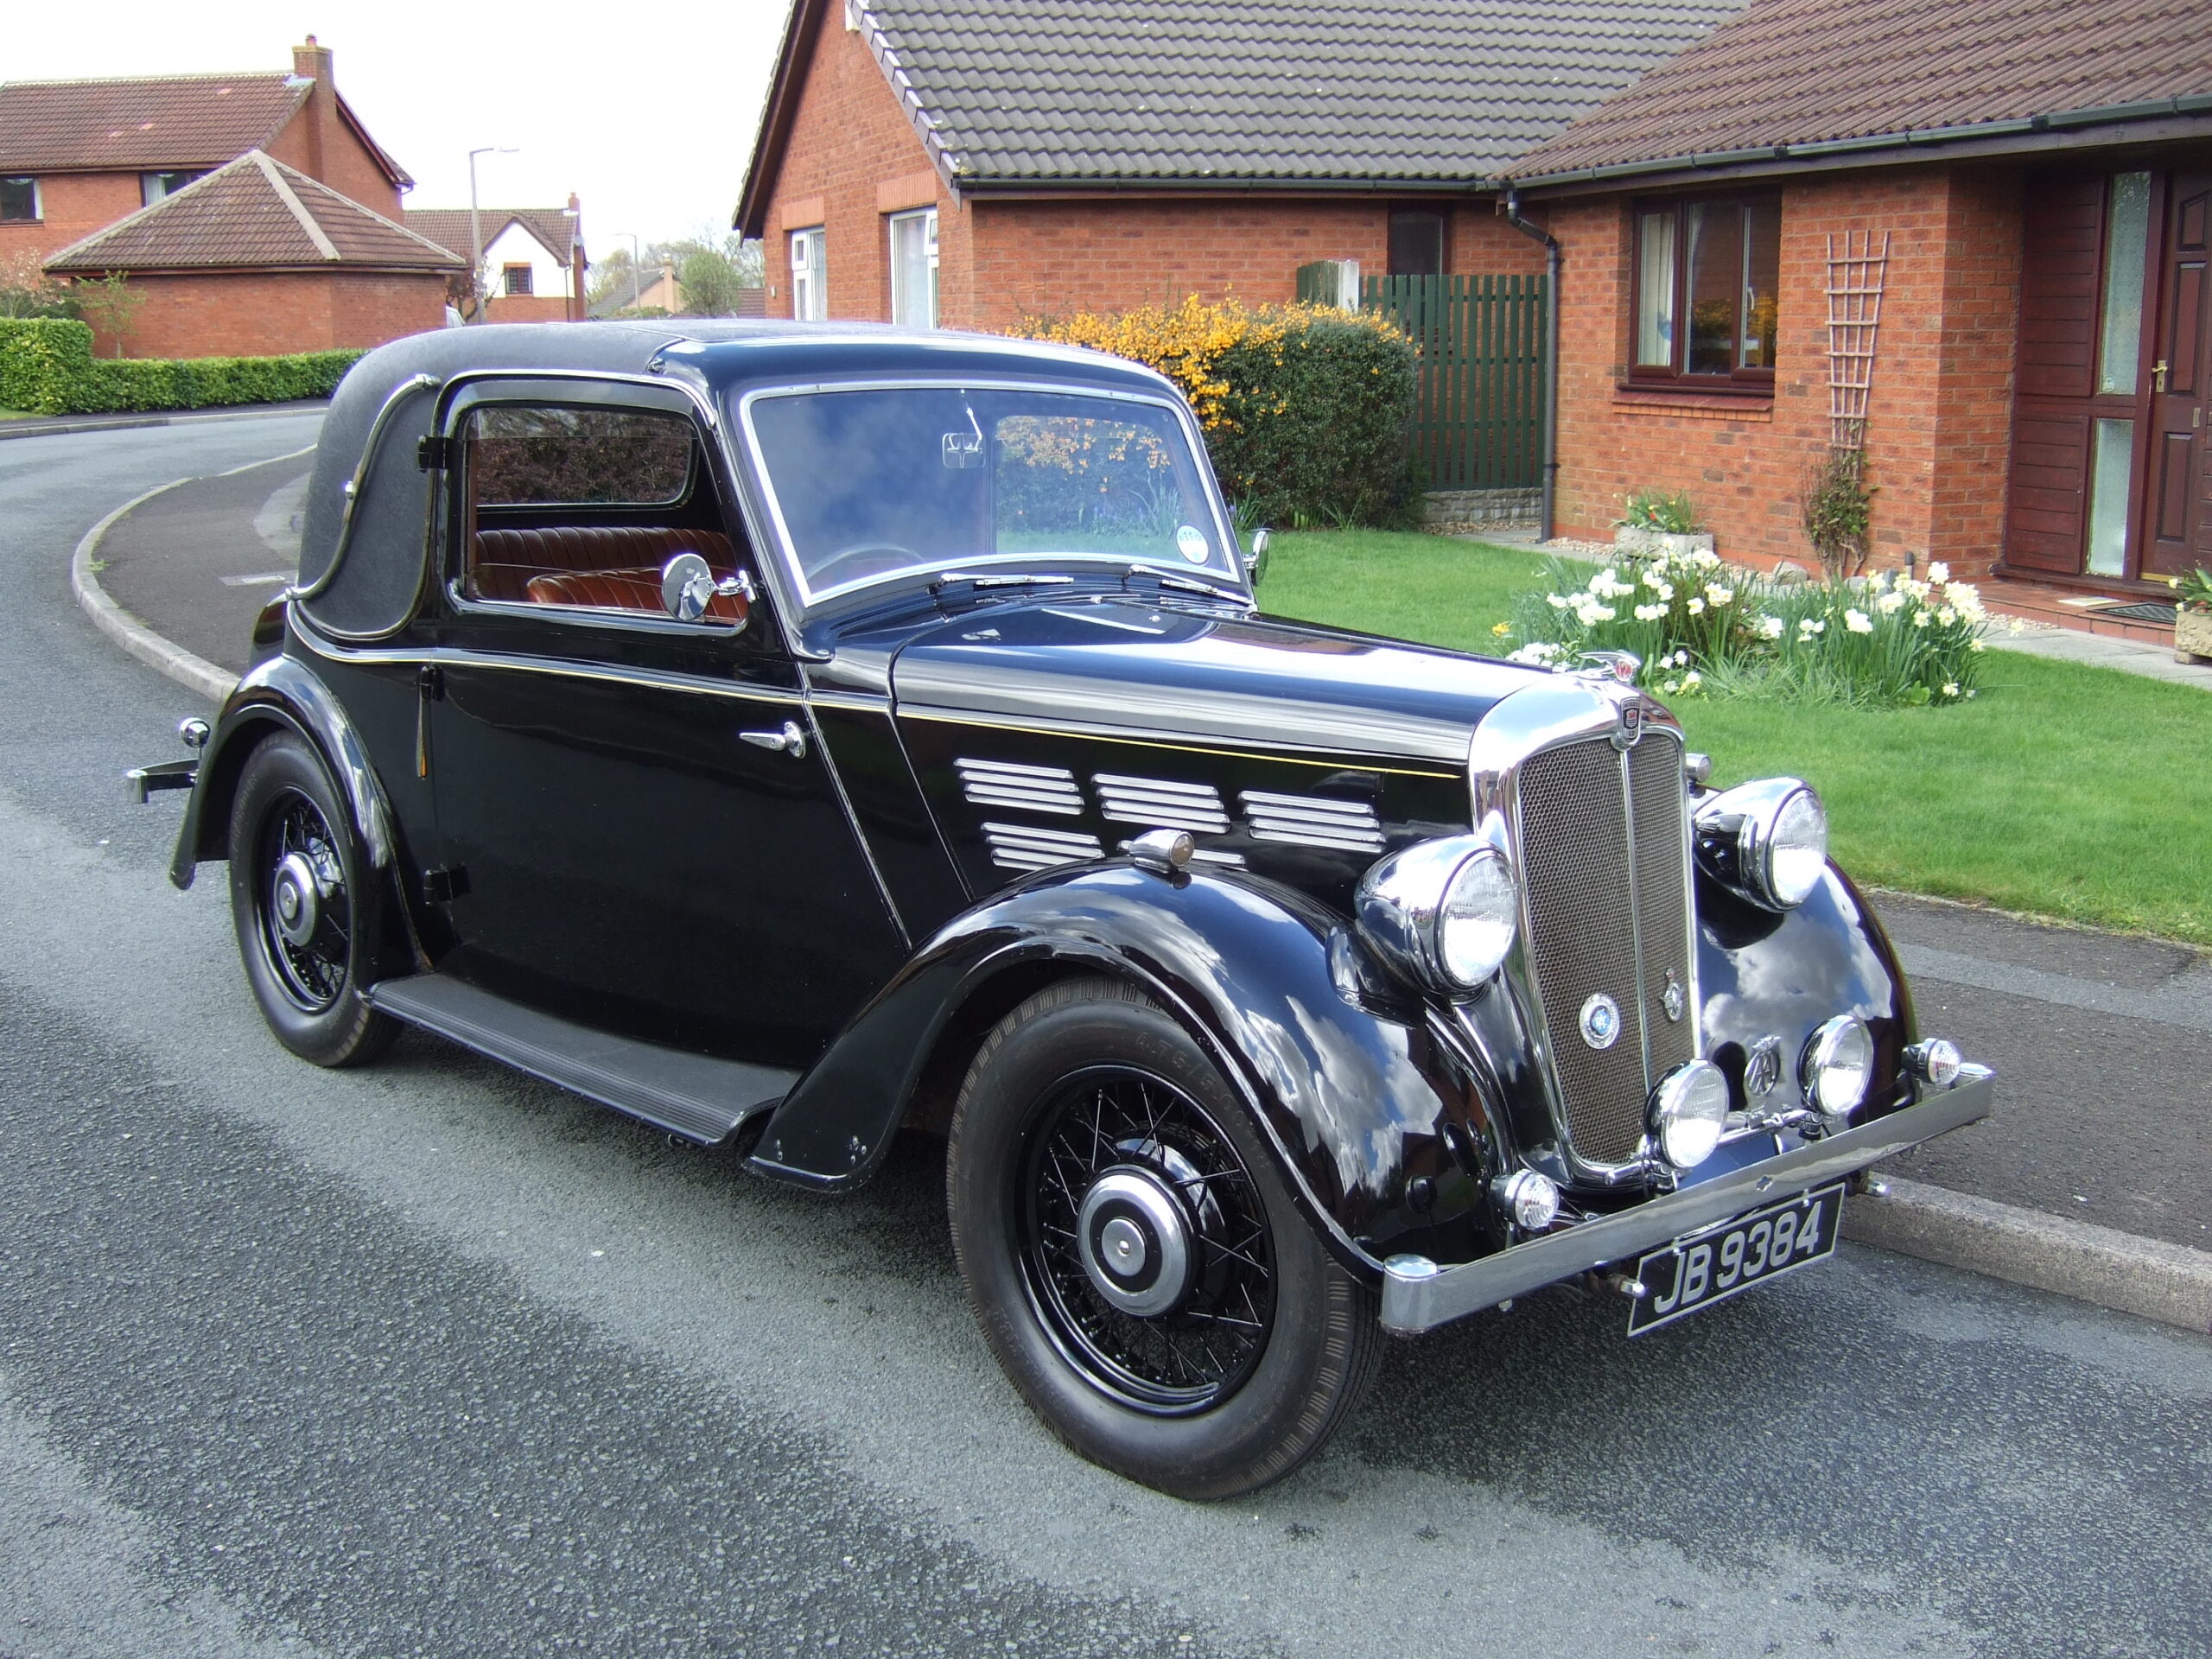 Preston and District Vintage Car Club is bringing 15 historic vehicles to the first Southport Classic and Speed event at Victoria Park in Southport on Sunday, 10th October, 2021. 1936 Morris 12/4 Special Coupe owned by Preston and District Car Club member Tom Taylor